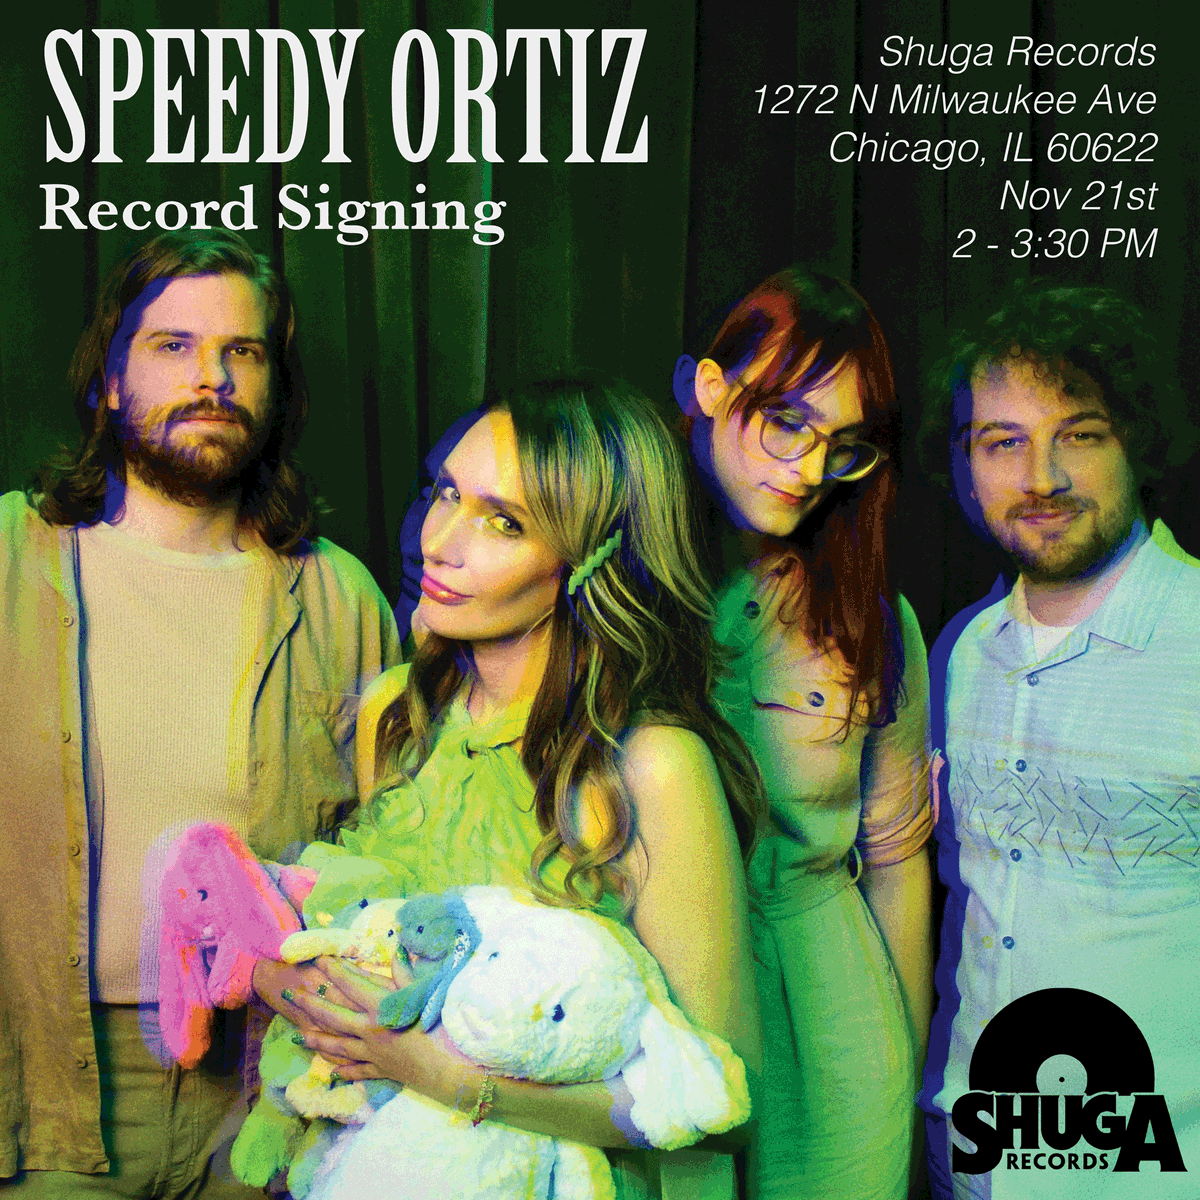 Chicago! Speedy Ortiz will be signing copies of Rabbit Rabbit at @Shugarecords before their show at @theemptybottle✍️ Meet the band & get your record signed starting at 2pm CST Tuesday, Nov 21st